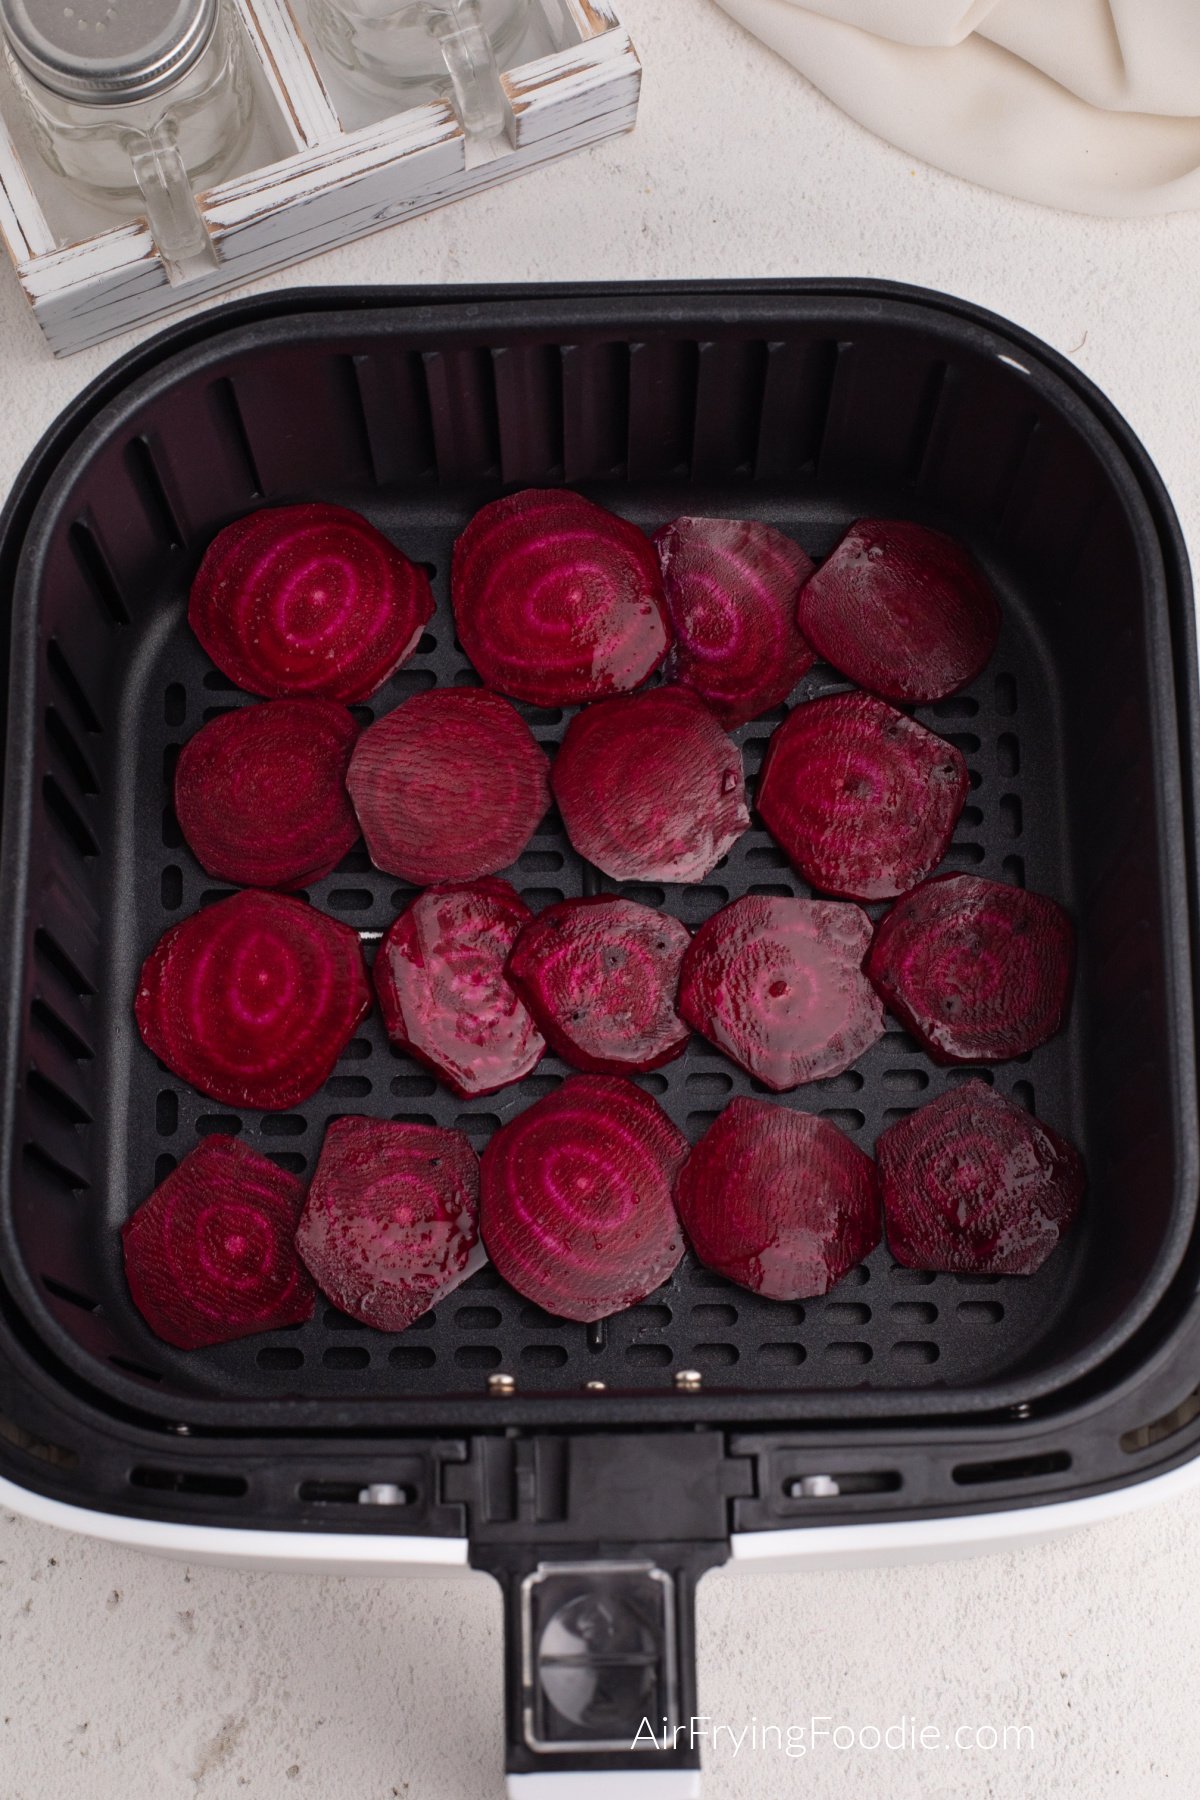 Sliced beets placed in a single layer in the basket of the air fryer.